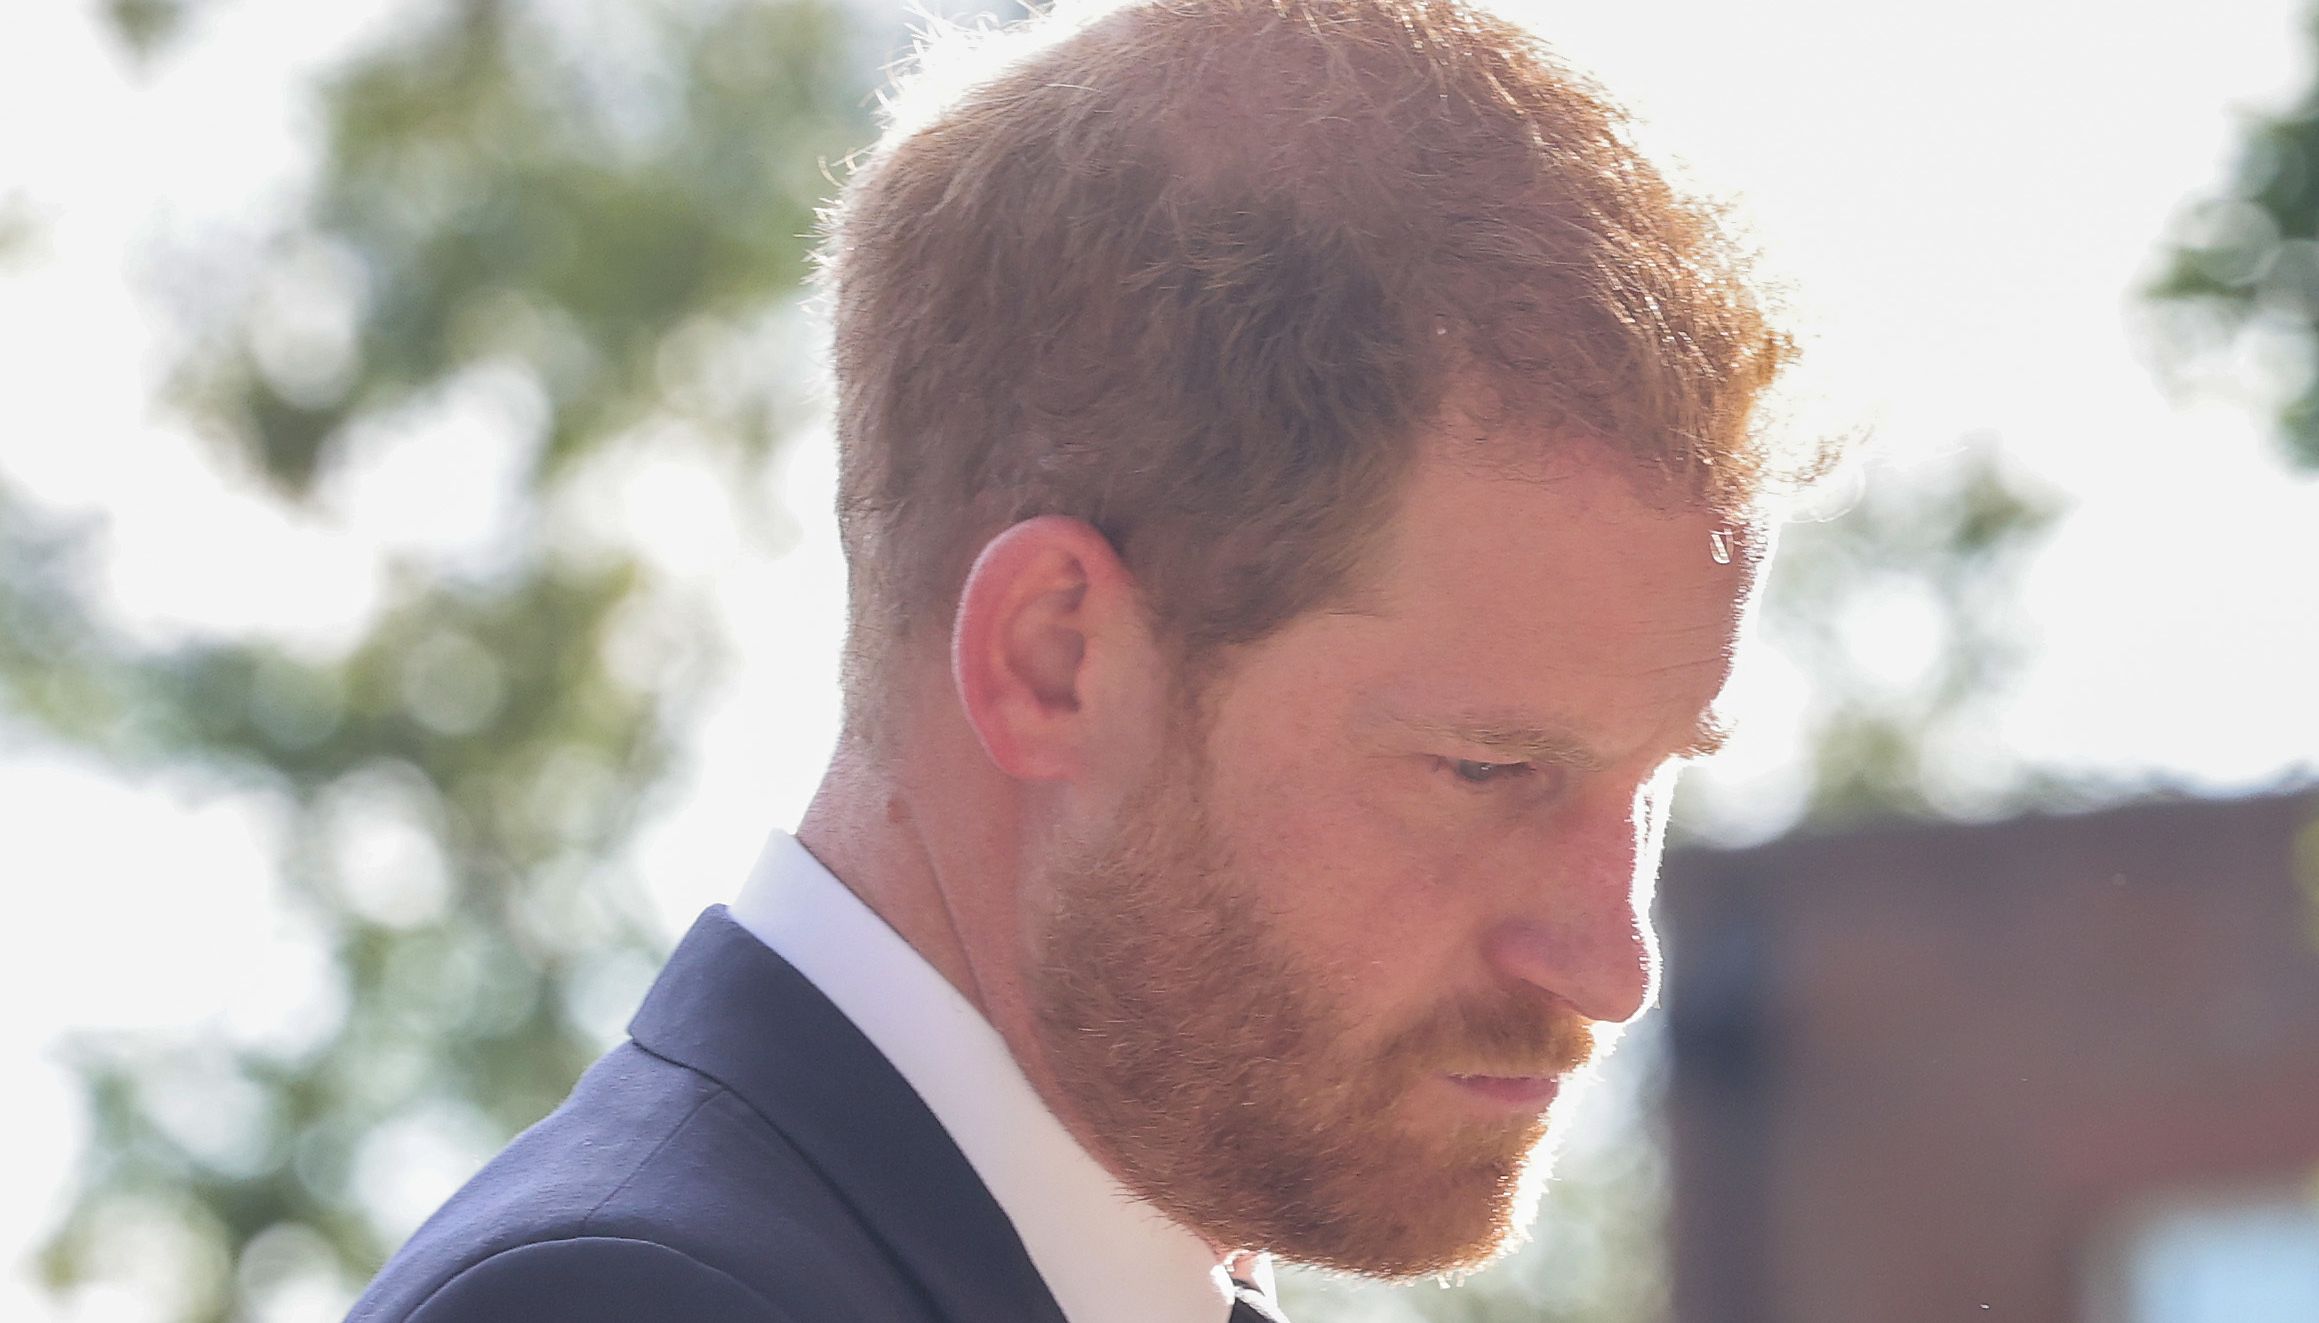 The Duke of Sussex viewing the messages and floral tributes left by members of the public at Windsor Castle in Berkshire following the death of Queen Elizabeth II on Thursday. Picture date: Saturday September 10, 2022.